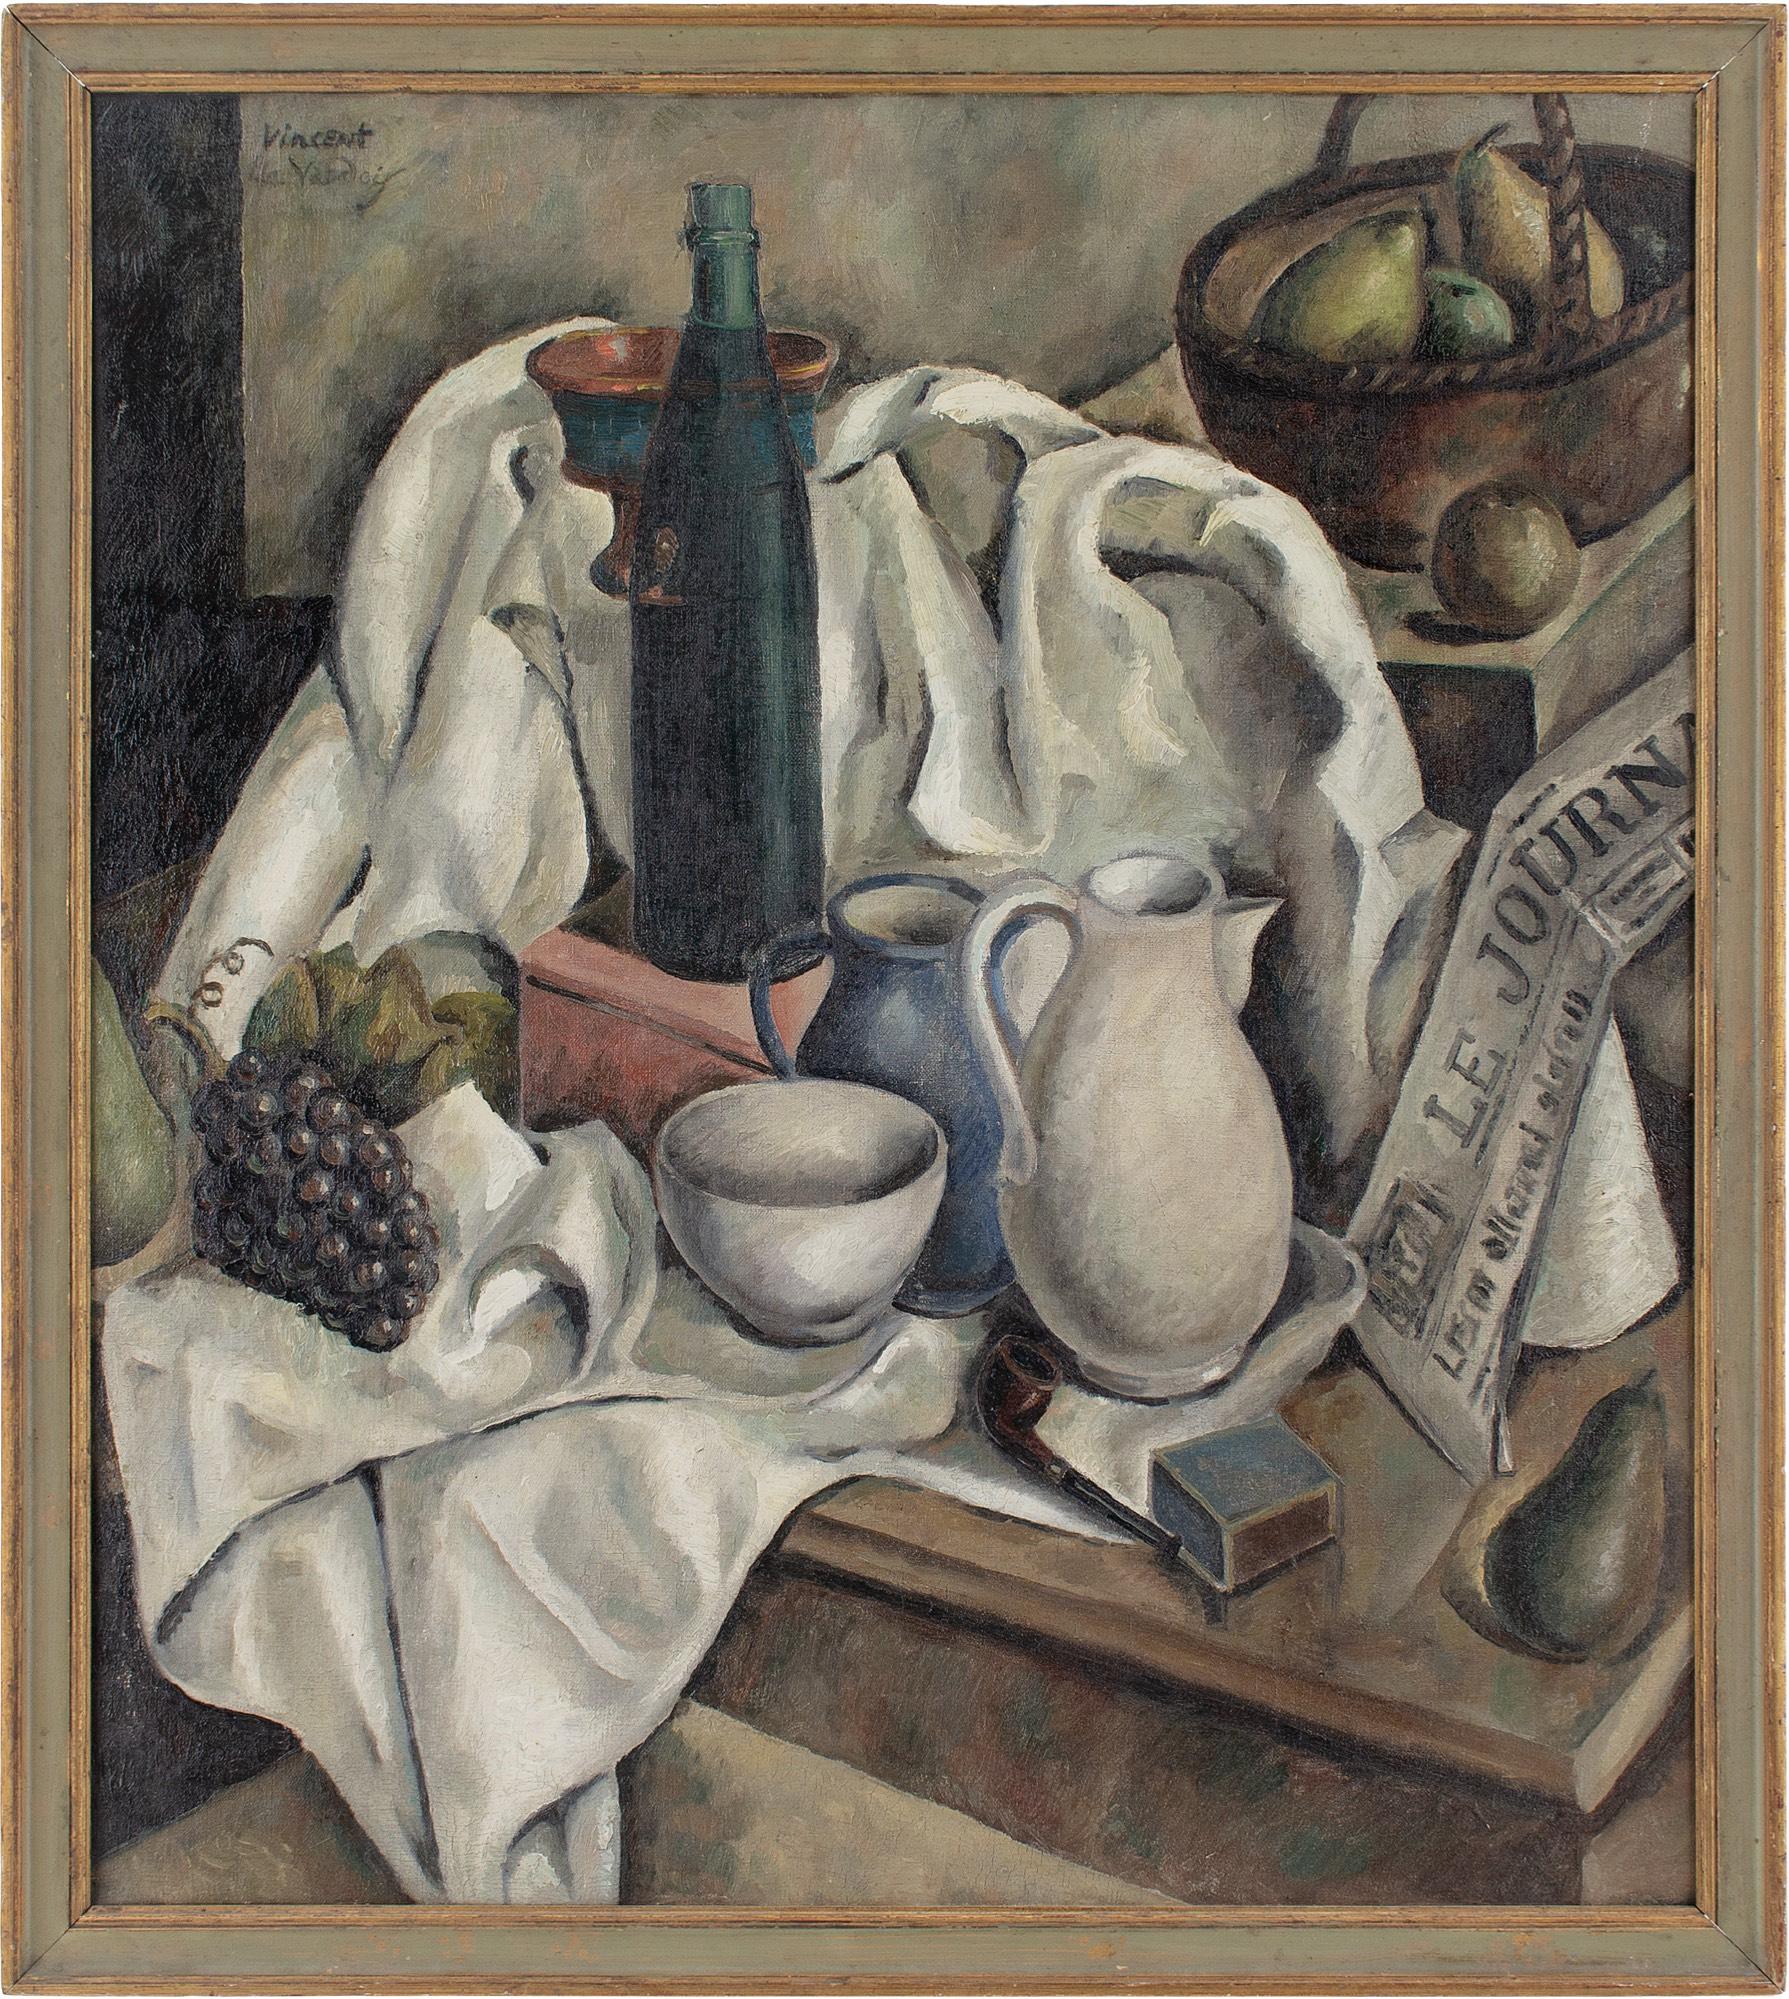 This early to mid-20th-century oil painting by ‘Vincent Le Vaudois’ depicts a still life with an assortment of objects including jugs, bottle, bowl, fruit, tablecloth, basket and newspaper. Produced around 1935, it emerged from a loosely connected